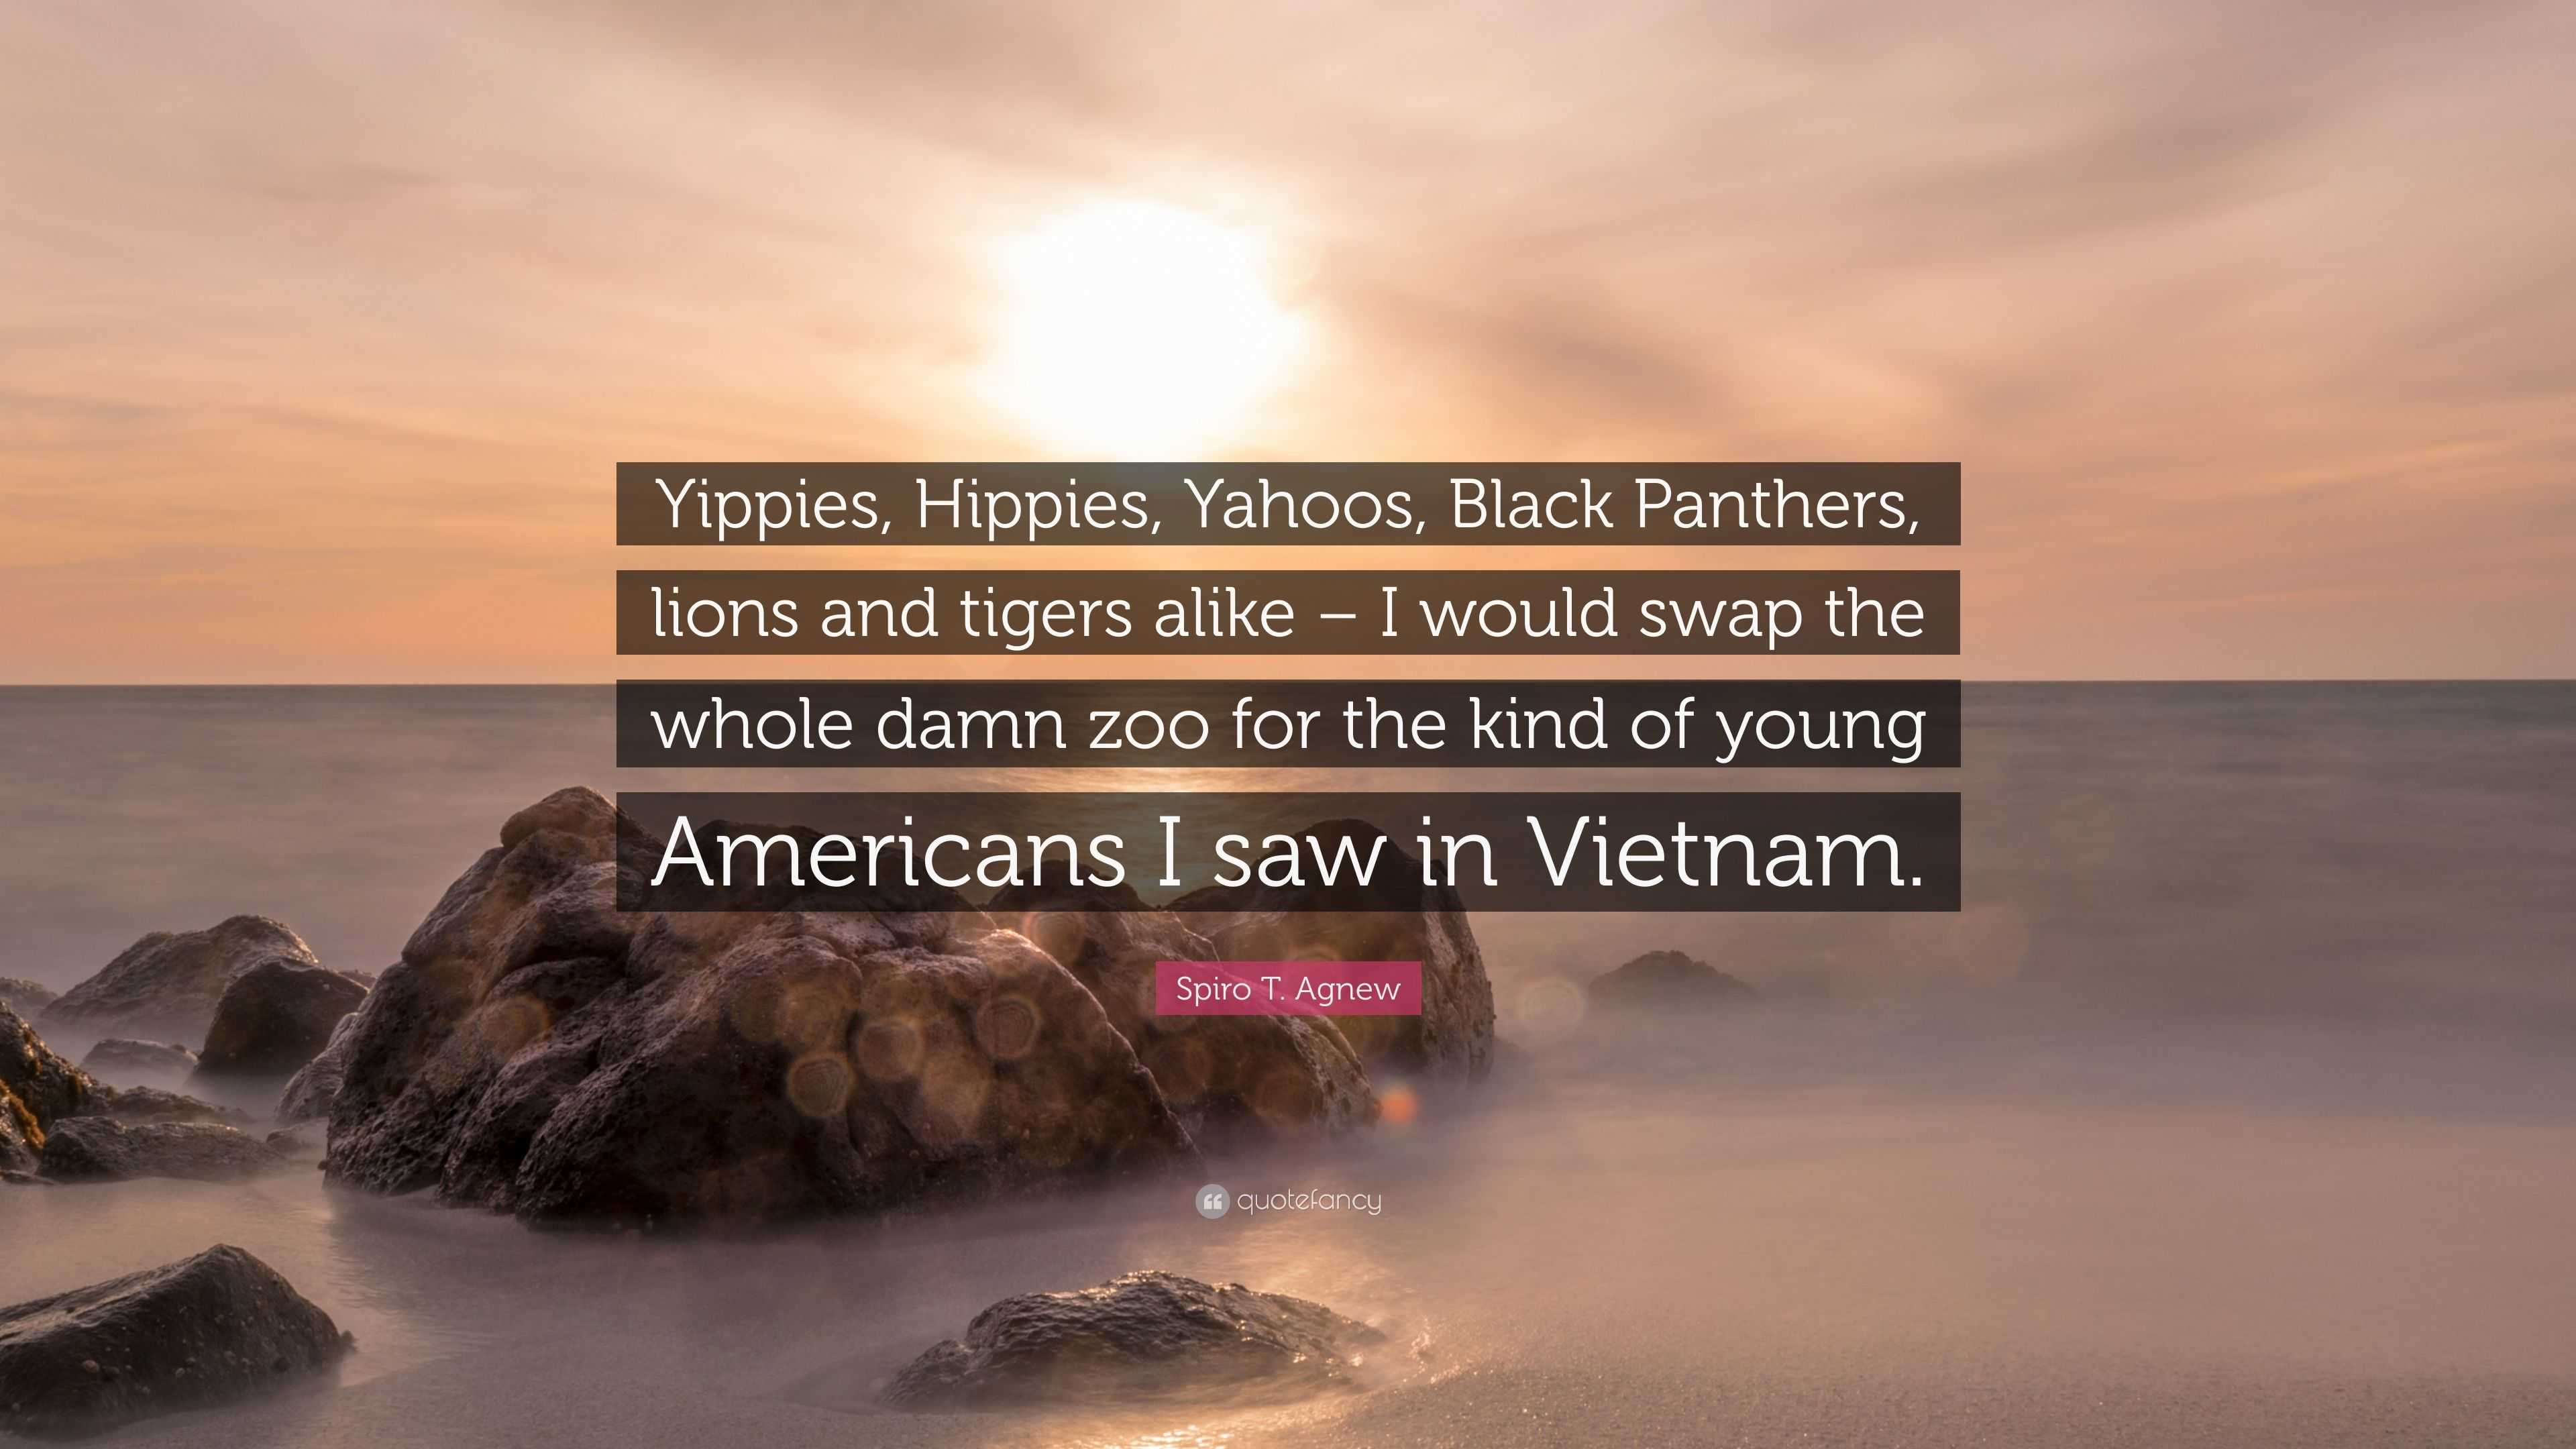 https://quotefancy.com/media/wallpaper/3840x2160/5284970-Spiro-T-Agnew-Quote-Yippies-Hippies-Yahoos-Black-Panthers-lions.jpg